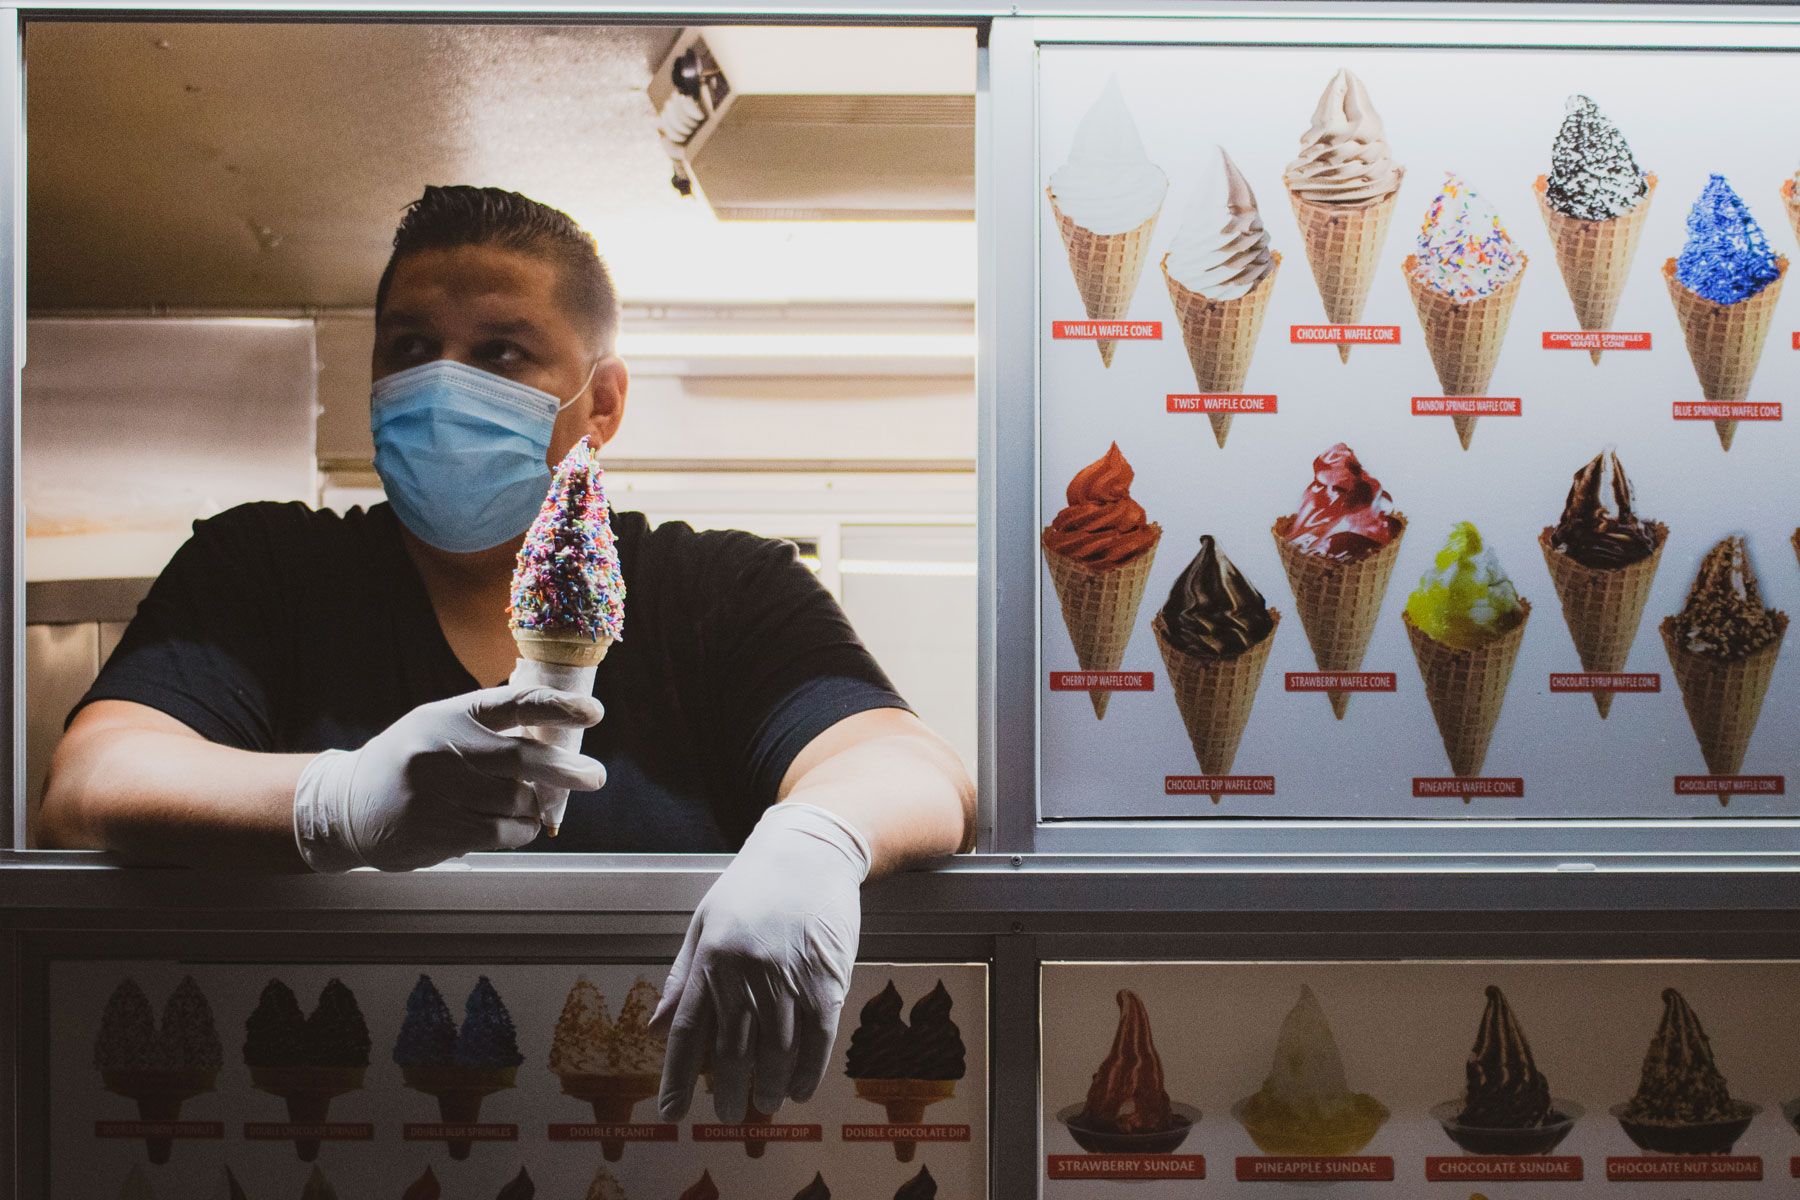 Andy Alvarez inside his ice cream truck holding an ice cream cone loaded with sprinkles.